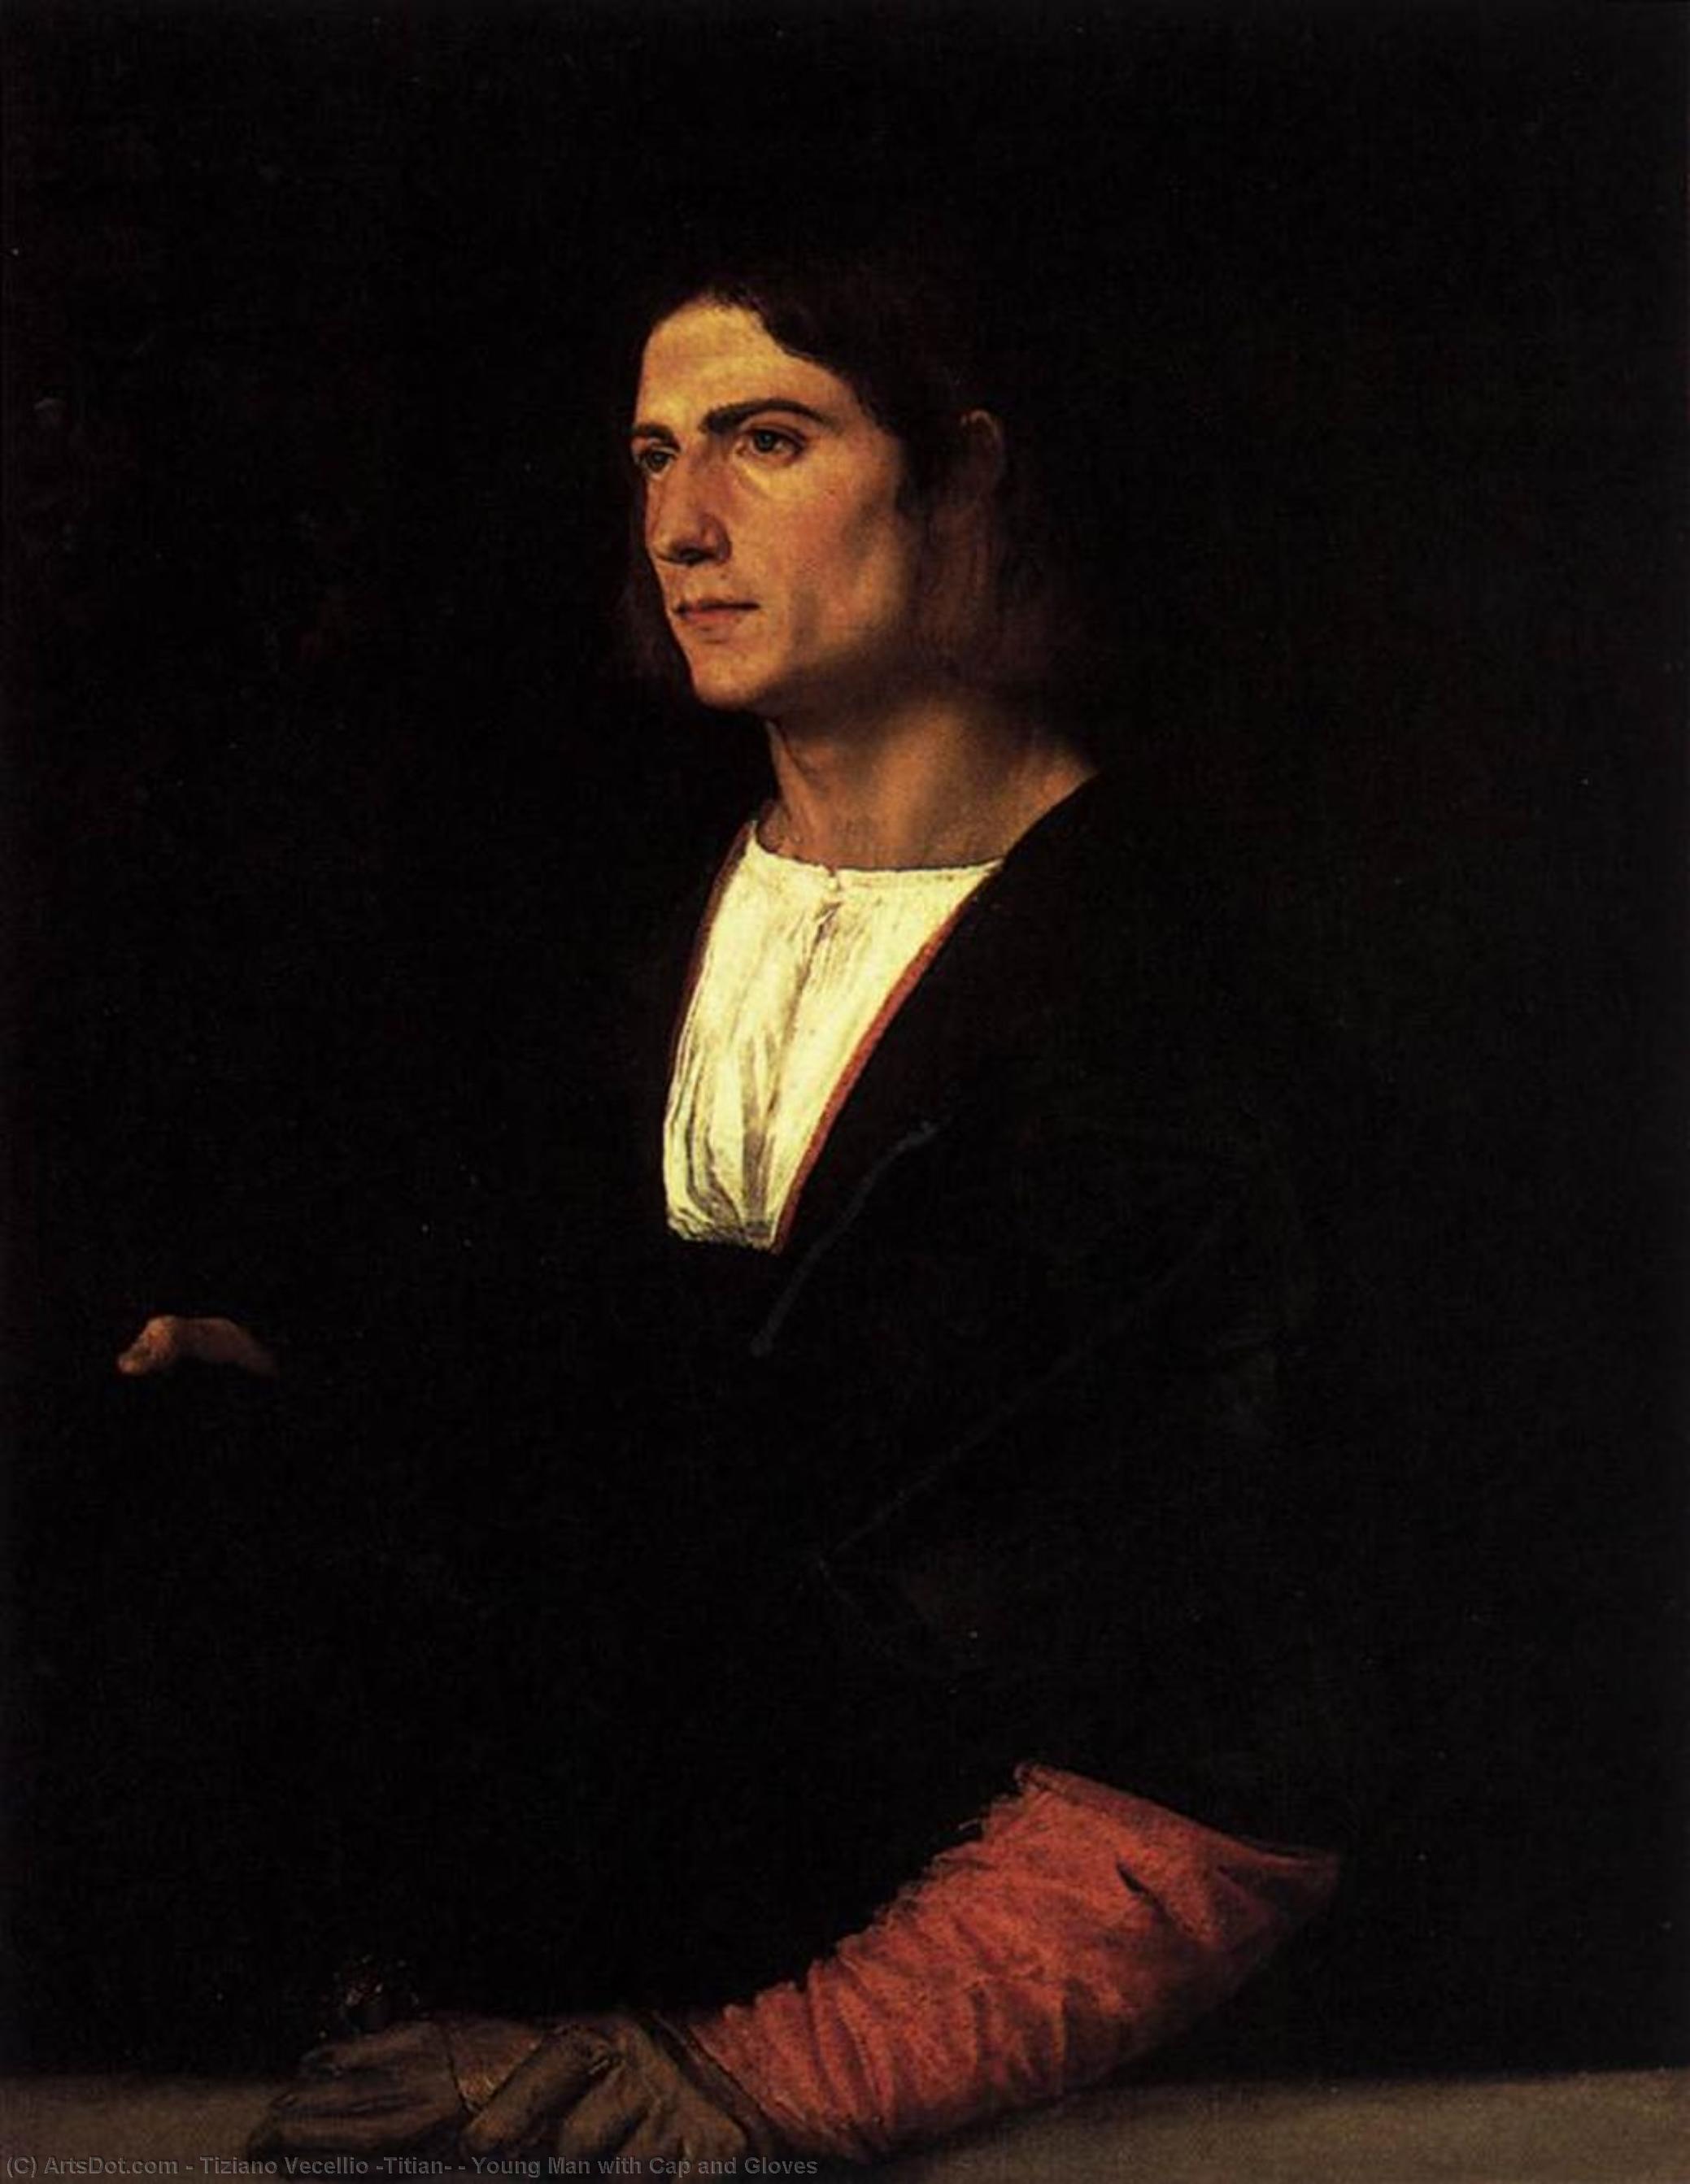 WikiOO.org - Encyclopedia of Fine Arts - Festés, Grafika Tiziano Vecellio (Titian) - Young Man with Cap and Gloves